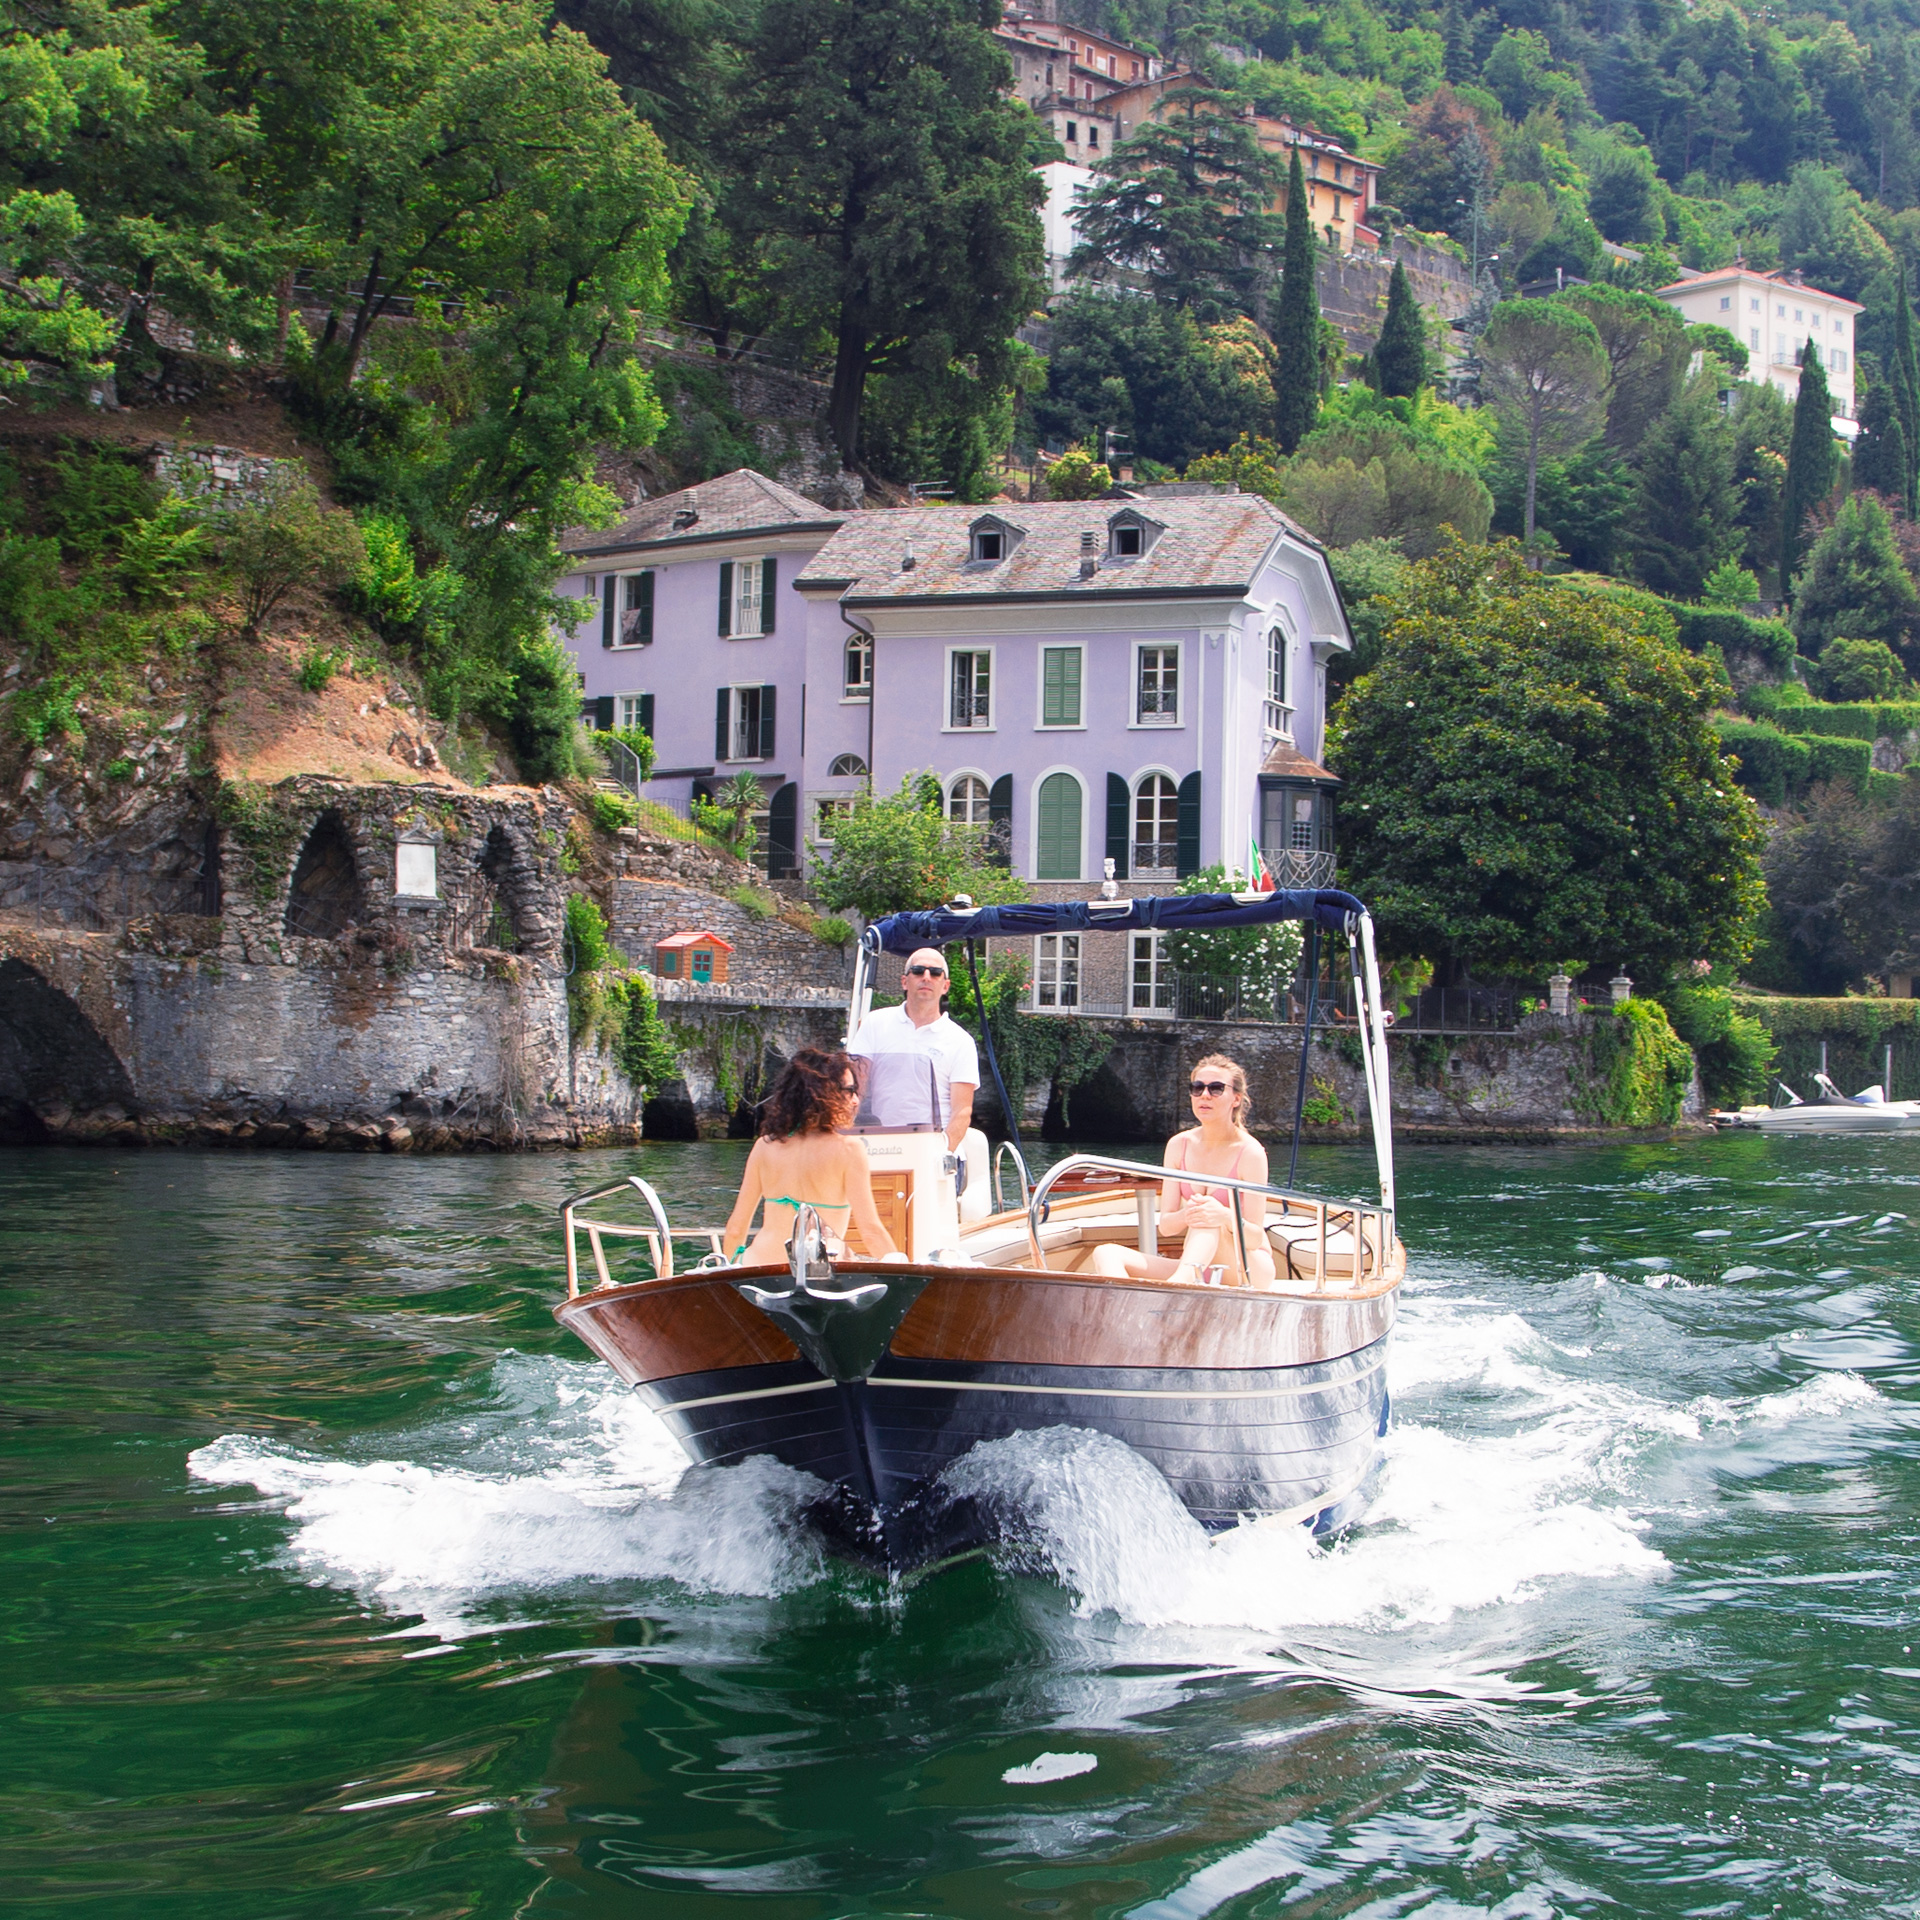 lake como boat tour from lecco